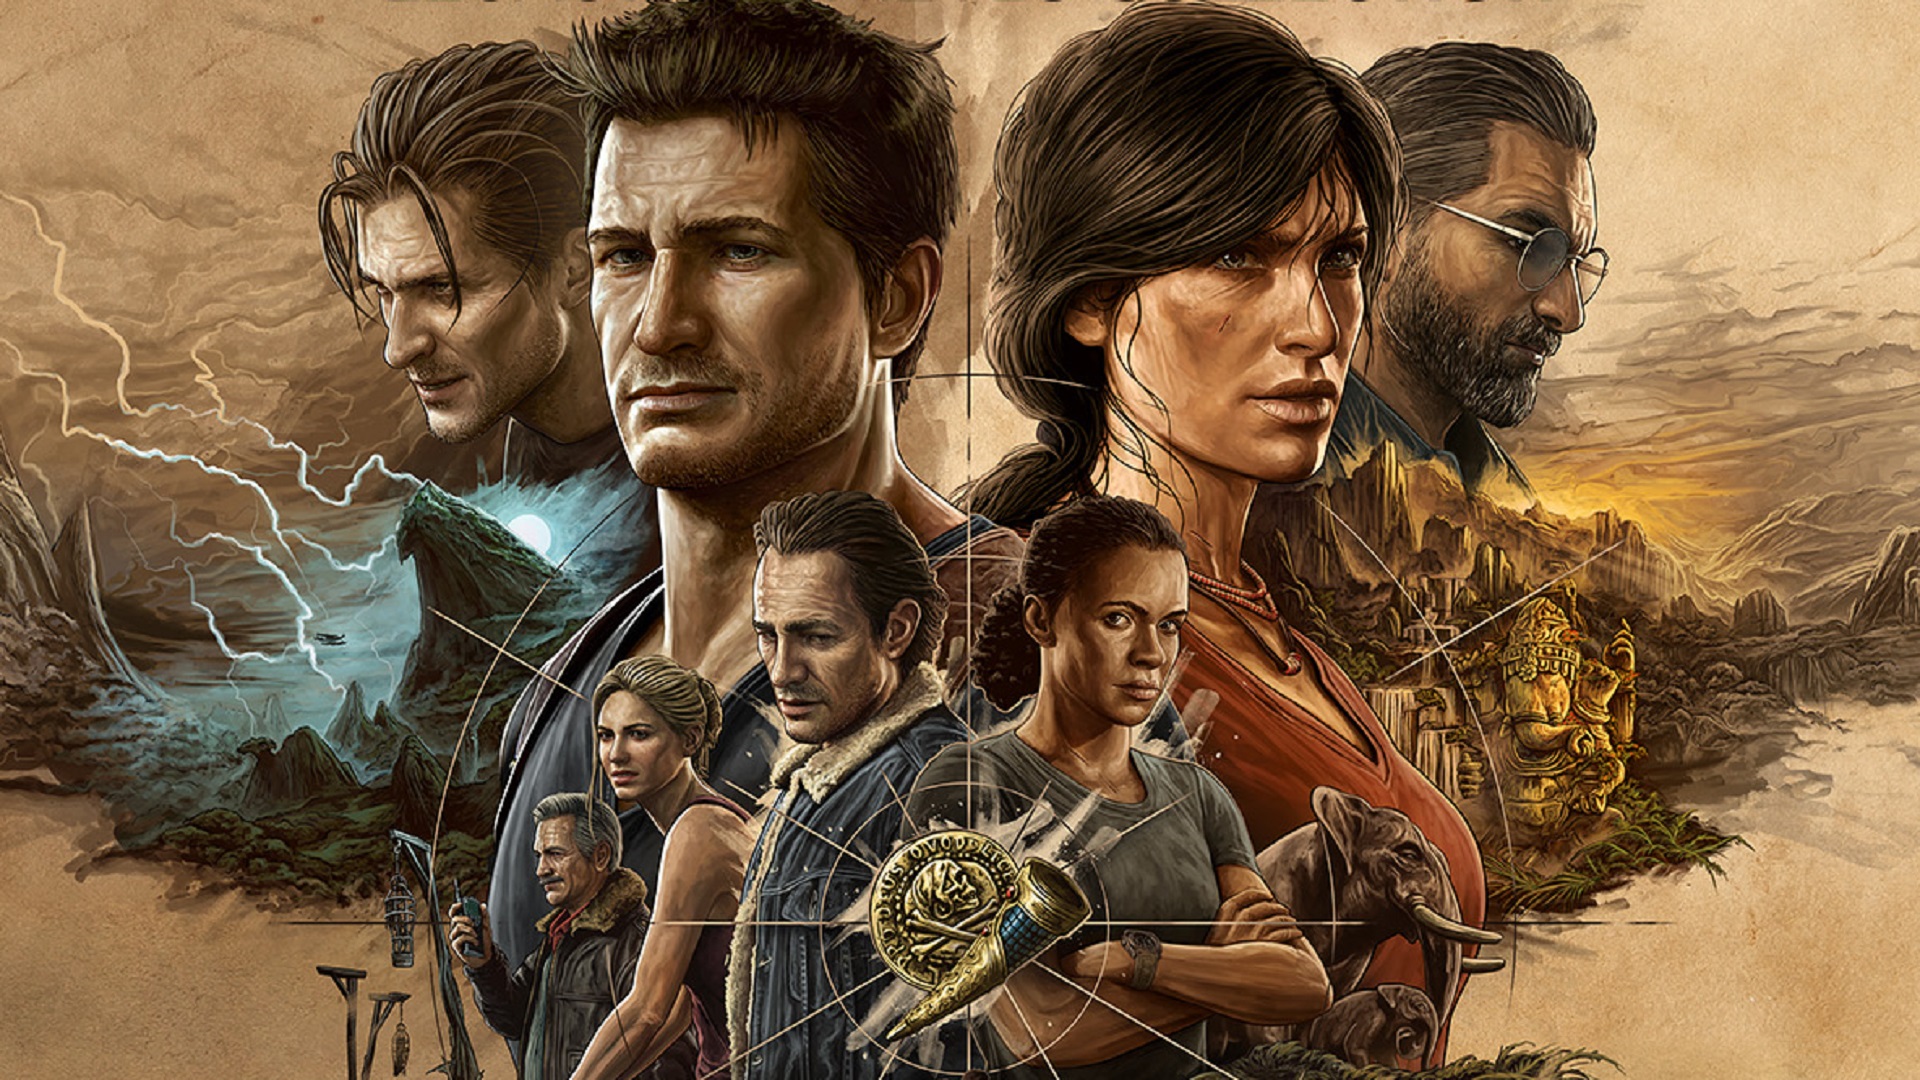 Legacy of thieves collection купить. Uncharted Legacy of Thieves. Uncharted: Legacy of Thieves collection. Uncharted наследие воров. Uncharted™: наследие воров. Коллекция.